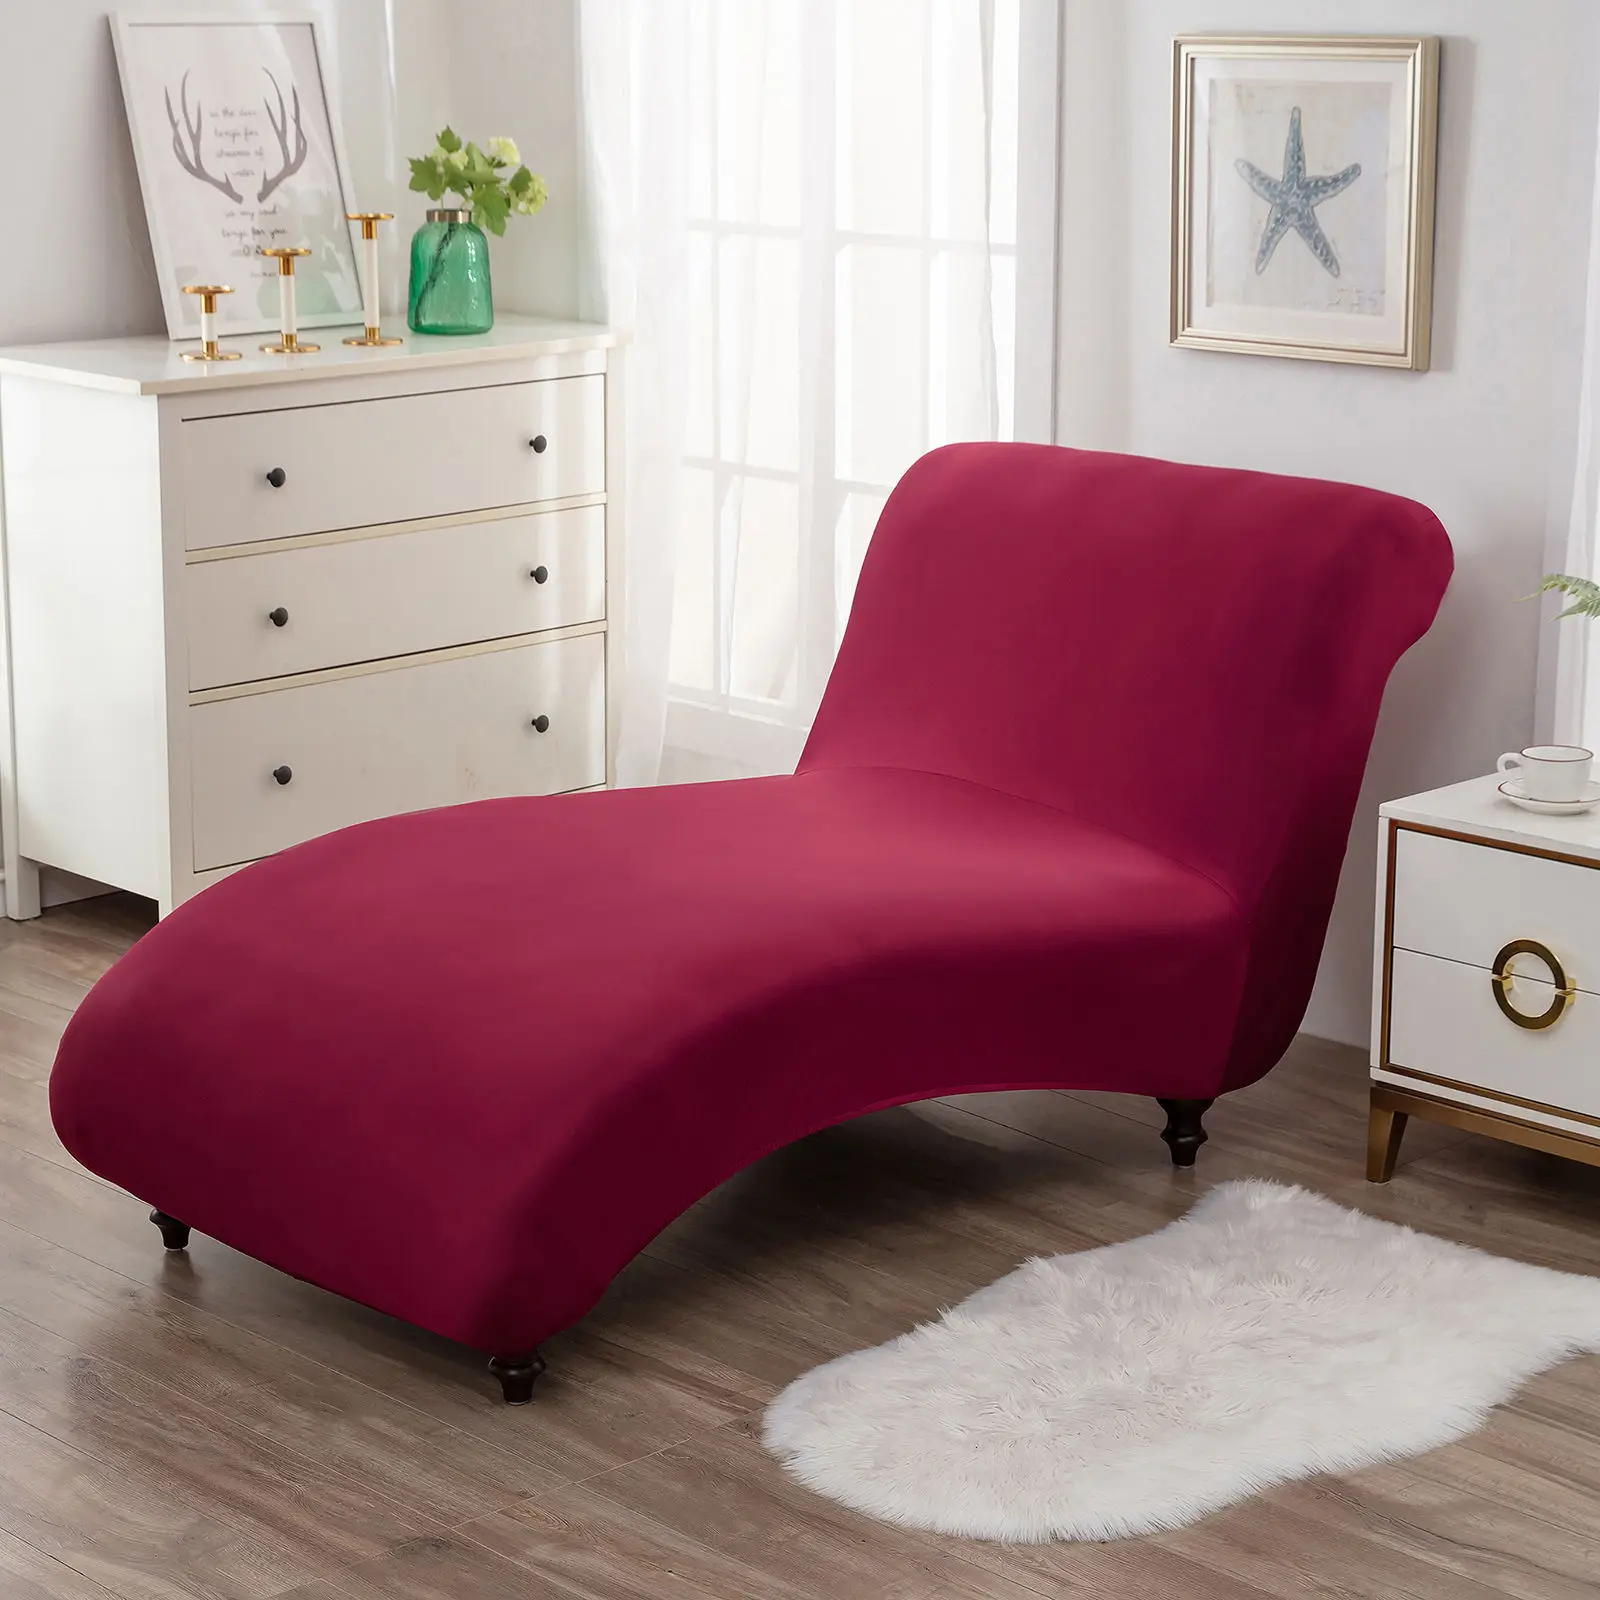 Chaise Lounge Cover Living Room Chaise Lounge Slipcover Machine Washable